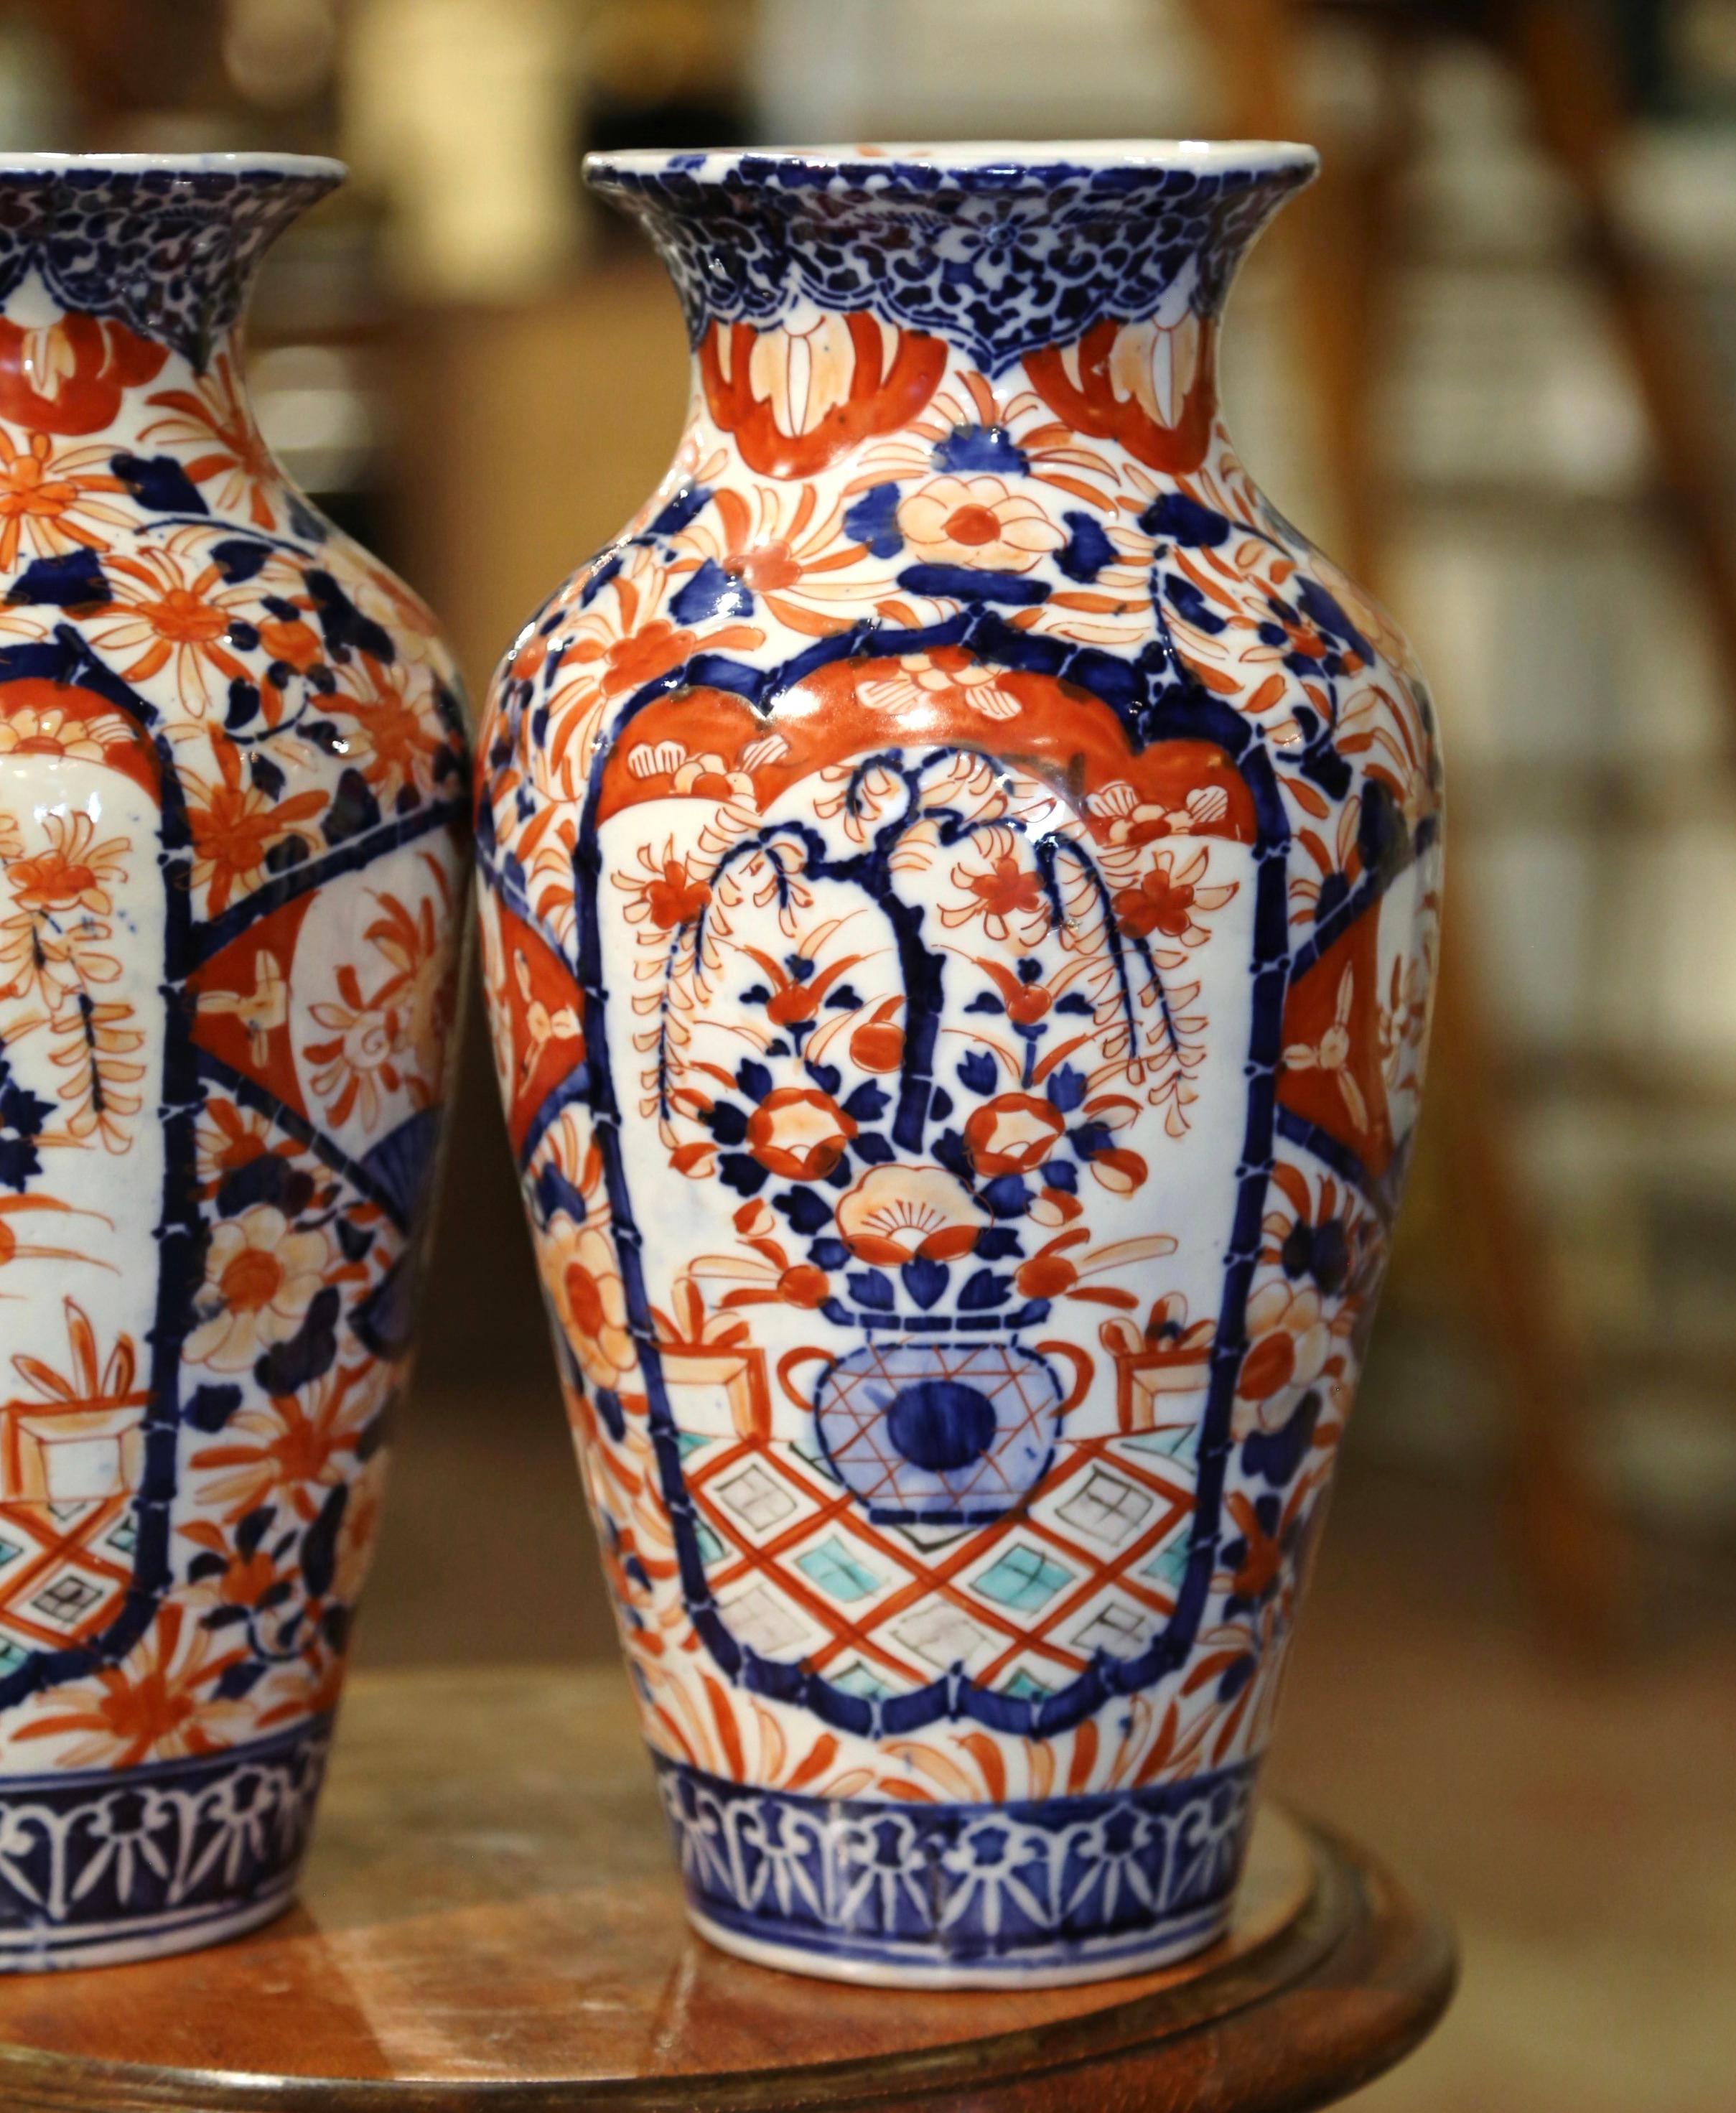 Pair of 19th Century Japanese Porcelain Imari Vases with Floral and Plant Decor In Excellent Condition For Sale In Dallas, TX